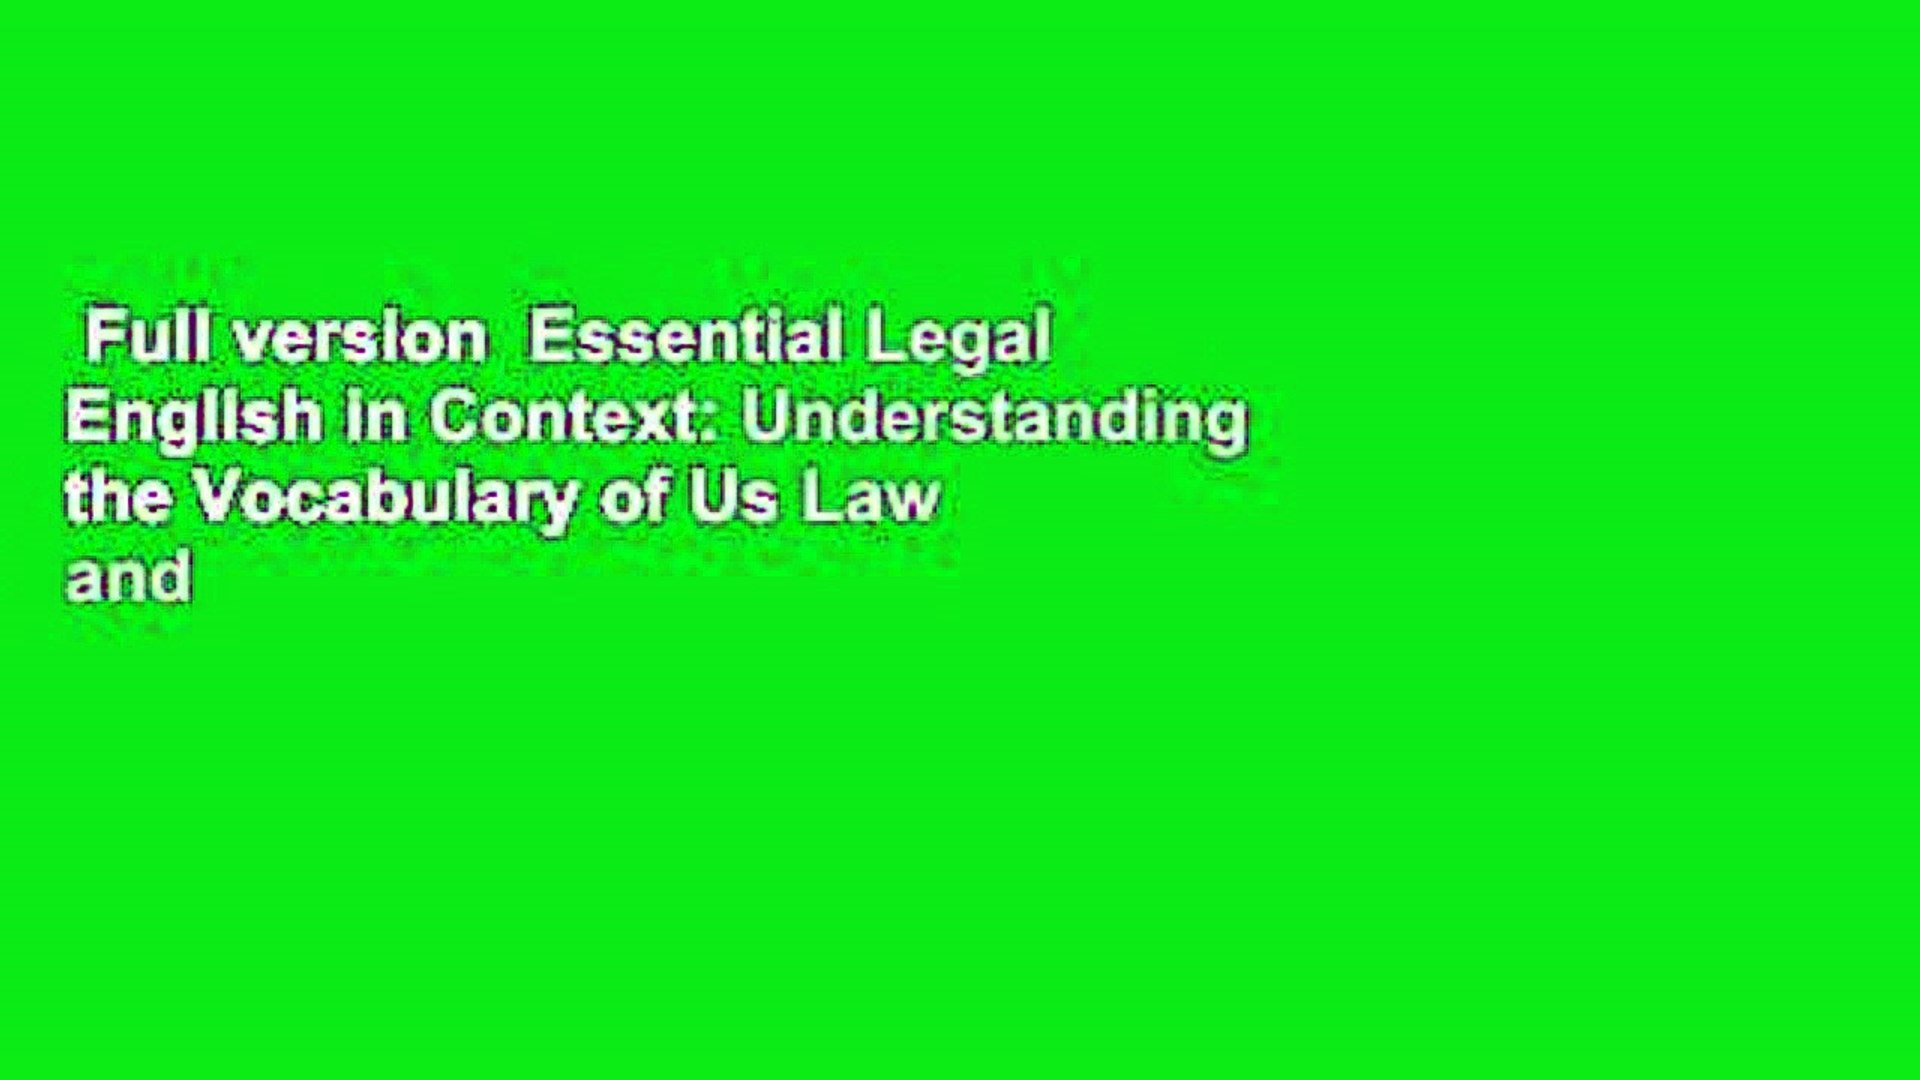 Full version  Essential Legal English in Context: Understanding the Vocabulary of Us Law and